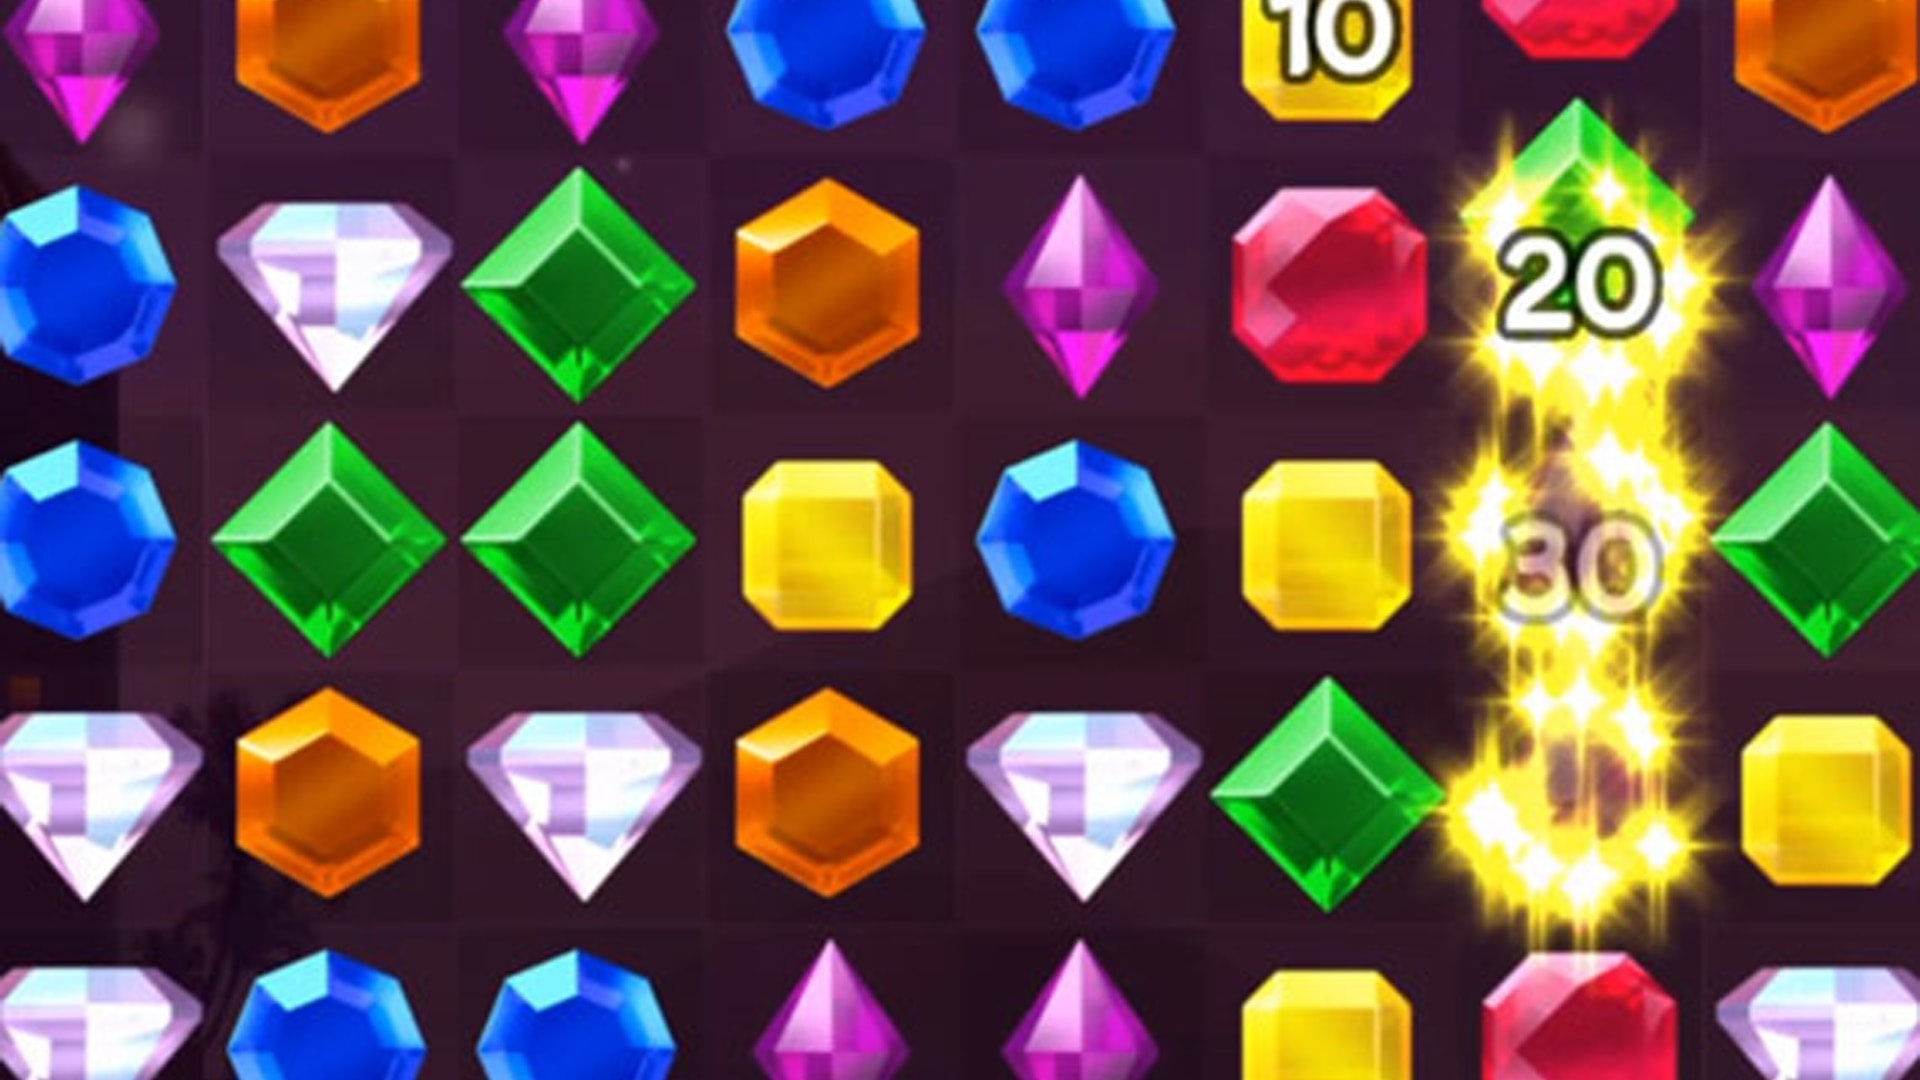 Colorful gameplay screenshot of Jewel Shuffle, showcasing vibrant jewels ready to be matched